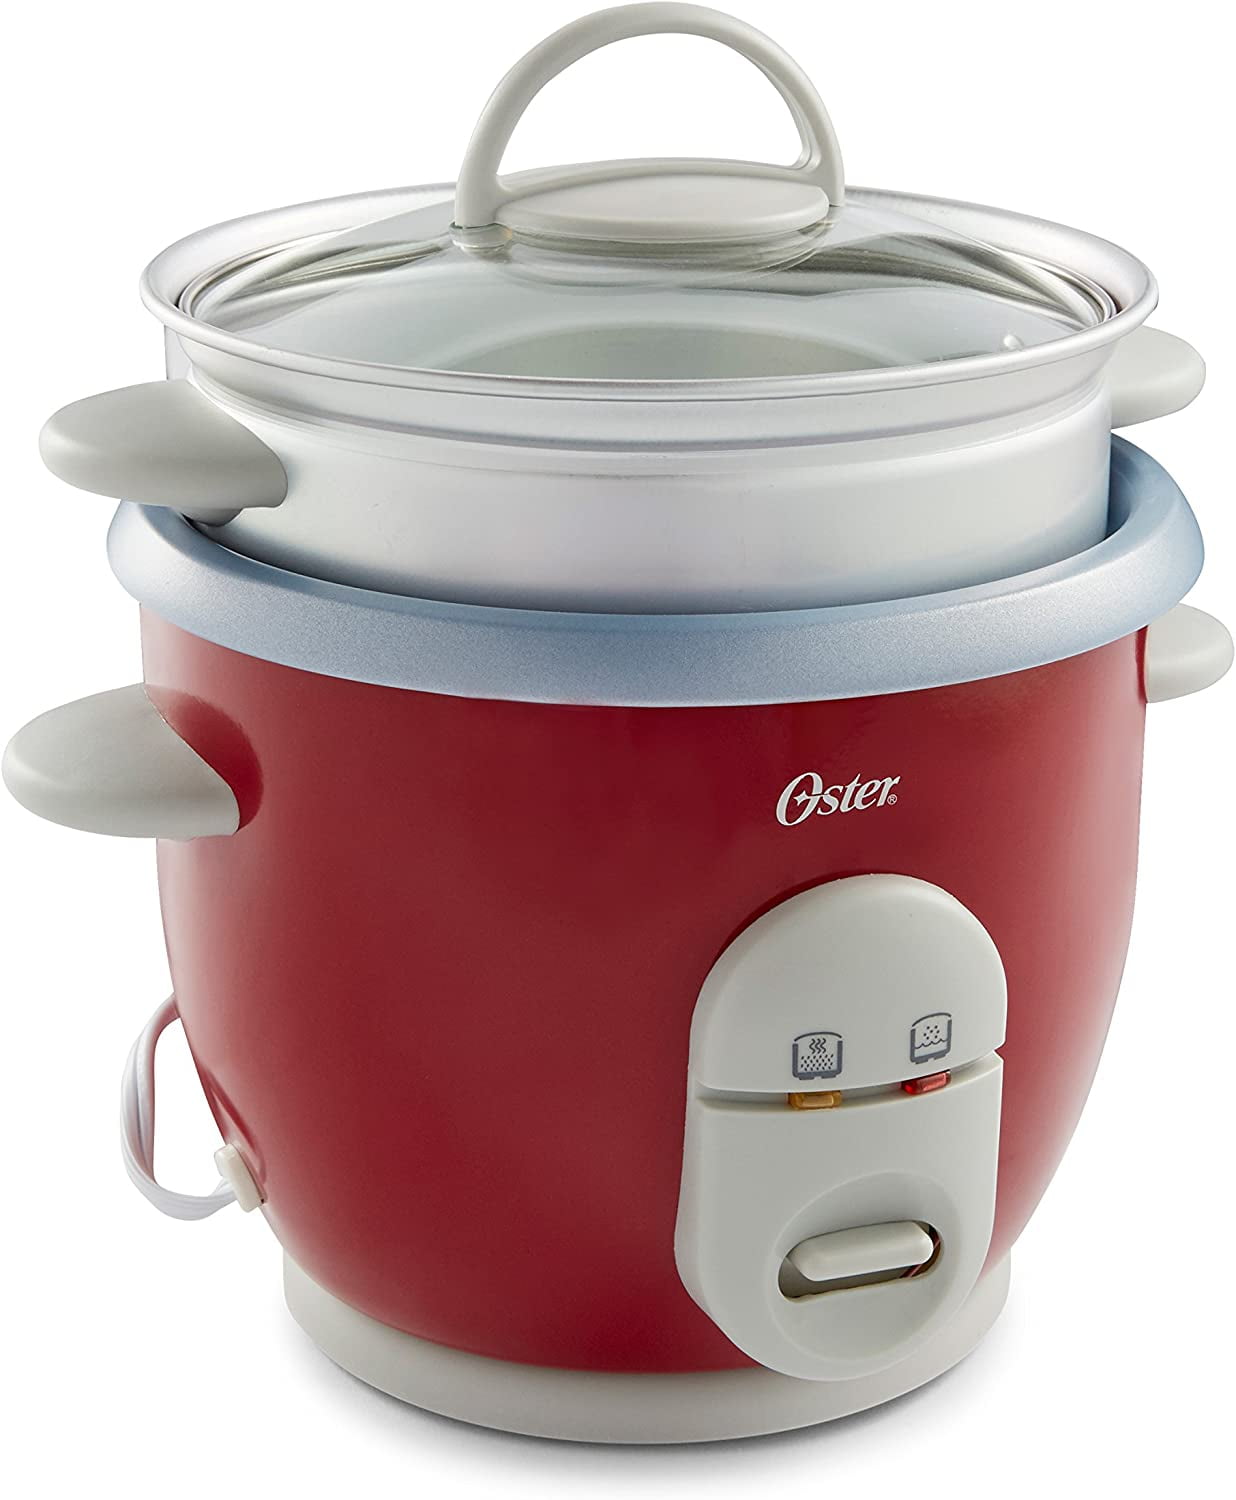 Oster 004722-000-000 Rice Cooker, 6 Cup, Red 